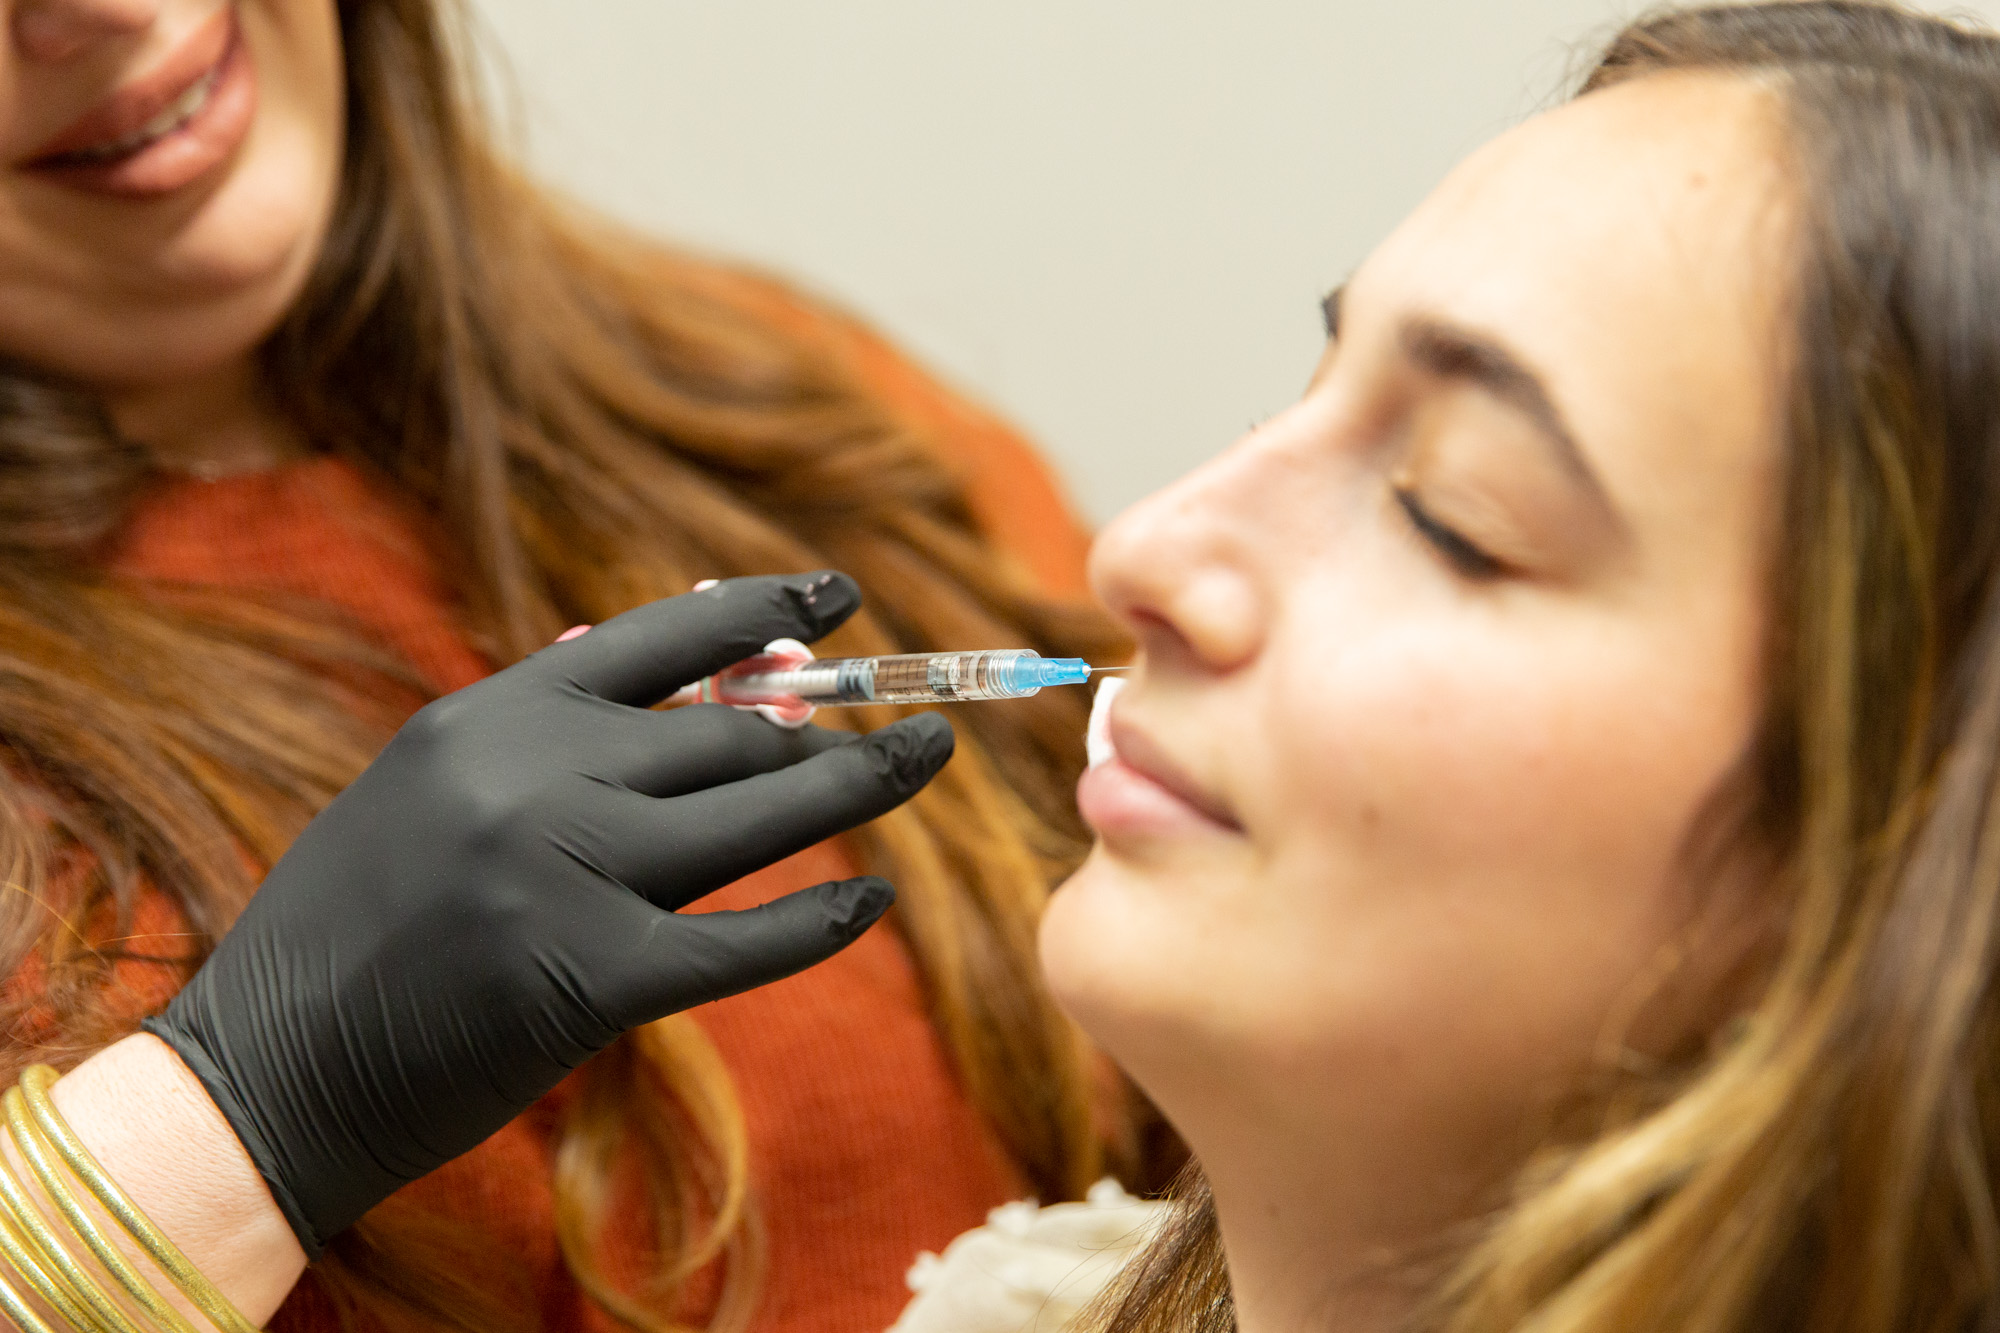 Marcos Medical provider injects dermal fillers into female client's right cheek.